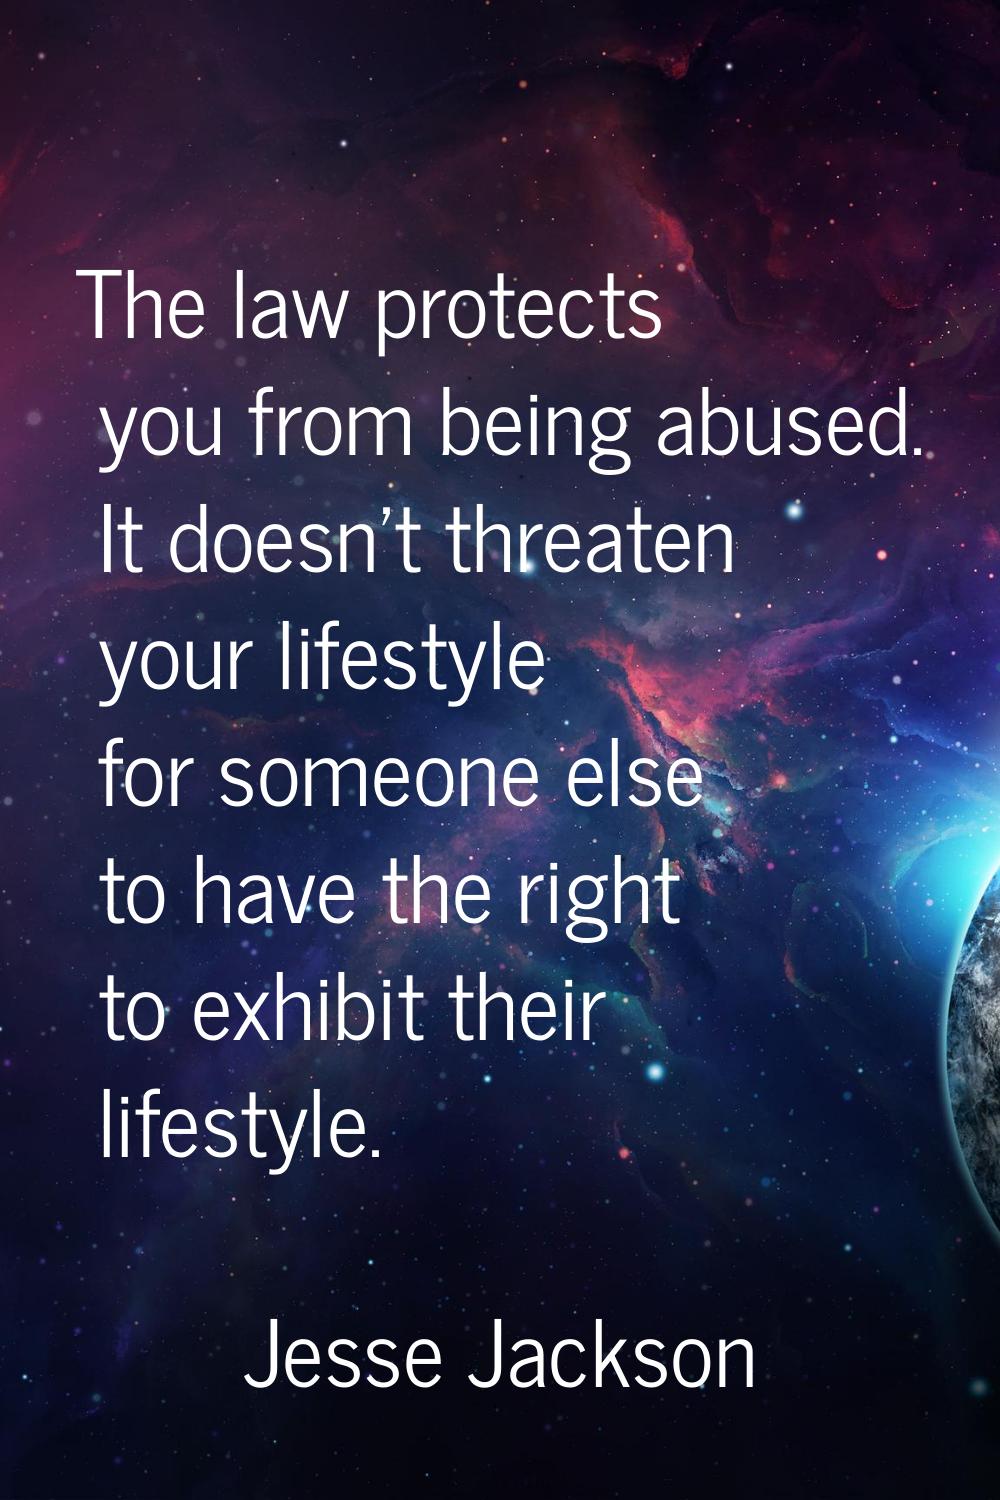 The law protects you from being abused. It doesn't threaten your lifestyle for someone else to have